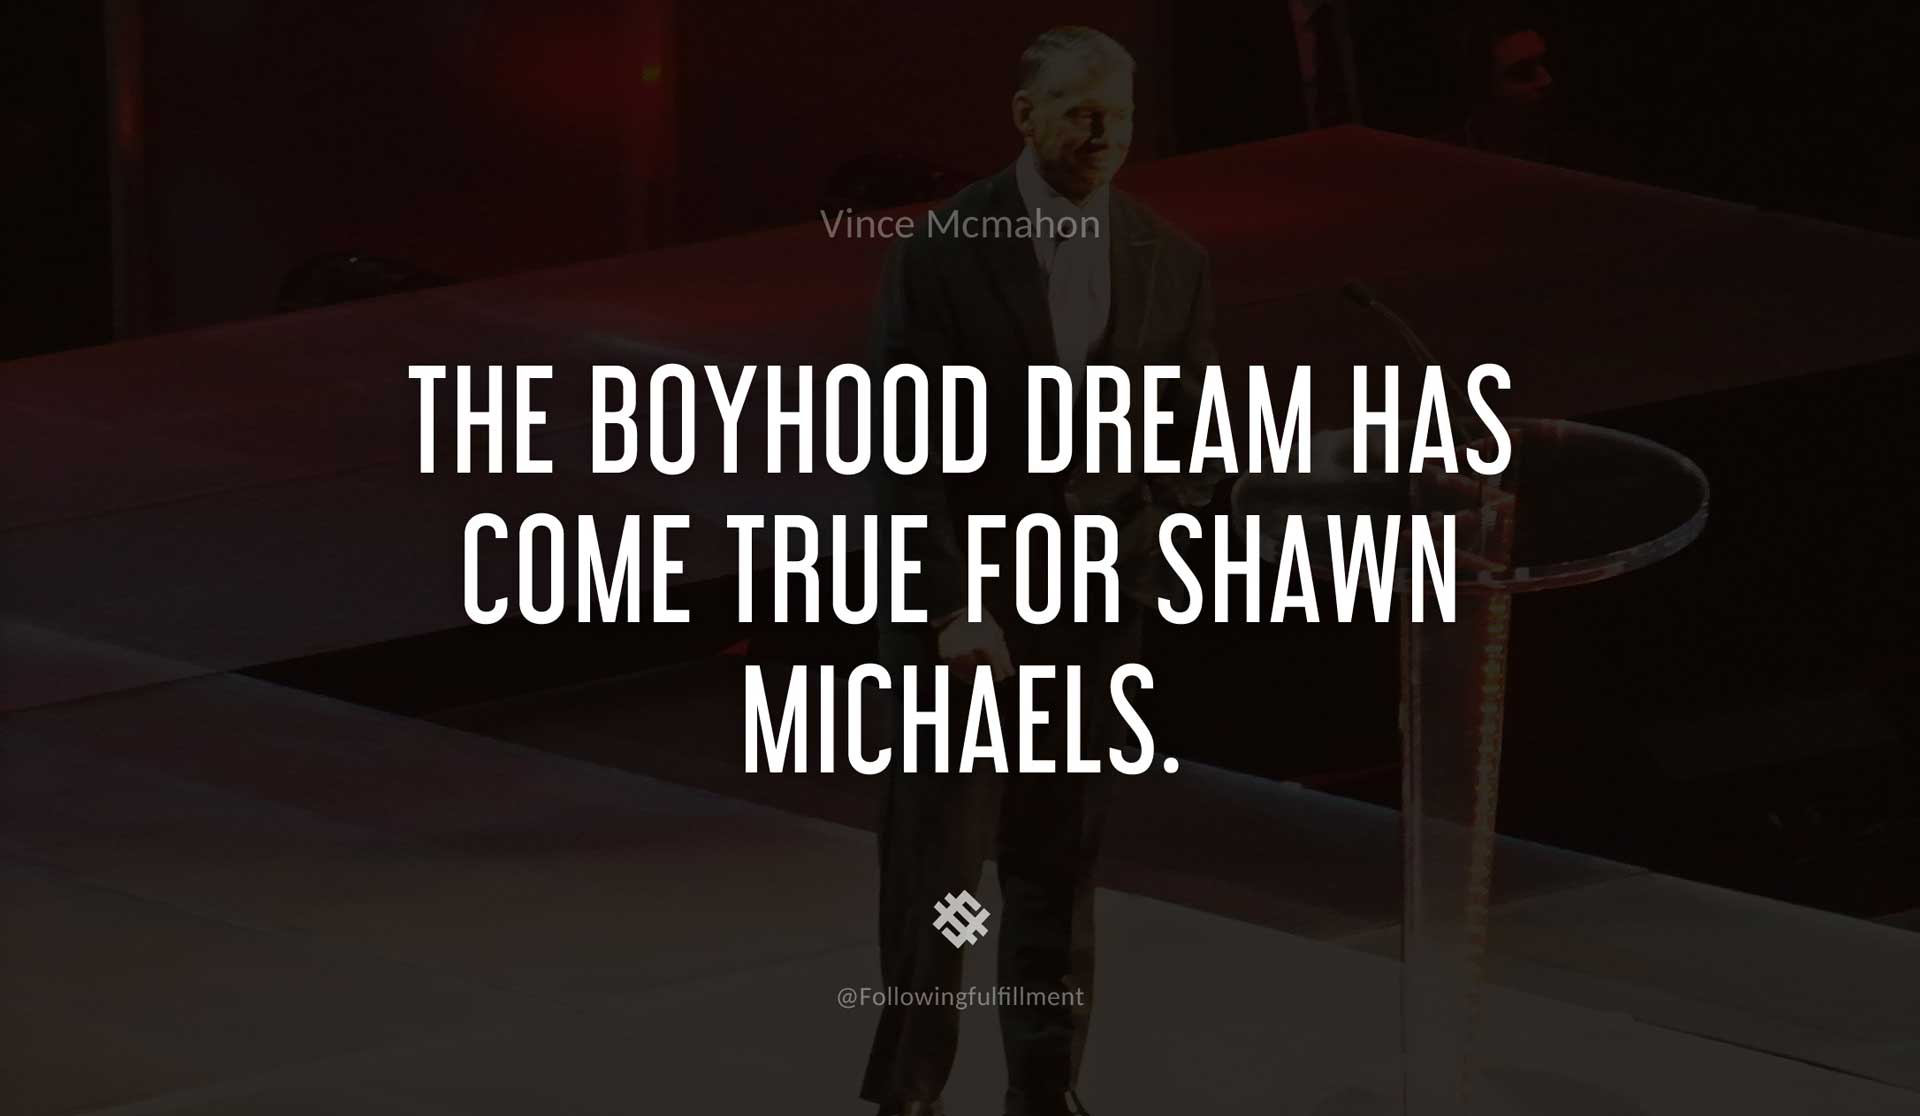 The-boyhood-dream-has-come-true-for-Shawn-Michaels.-VINCE-MCMAHON-Quote.jpg